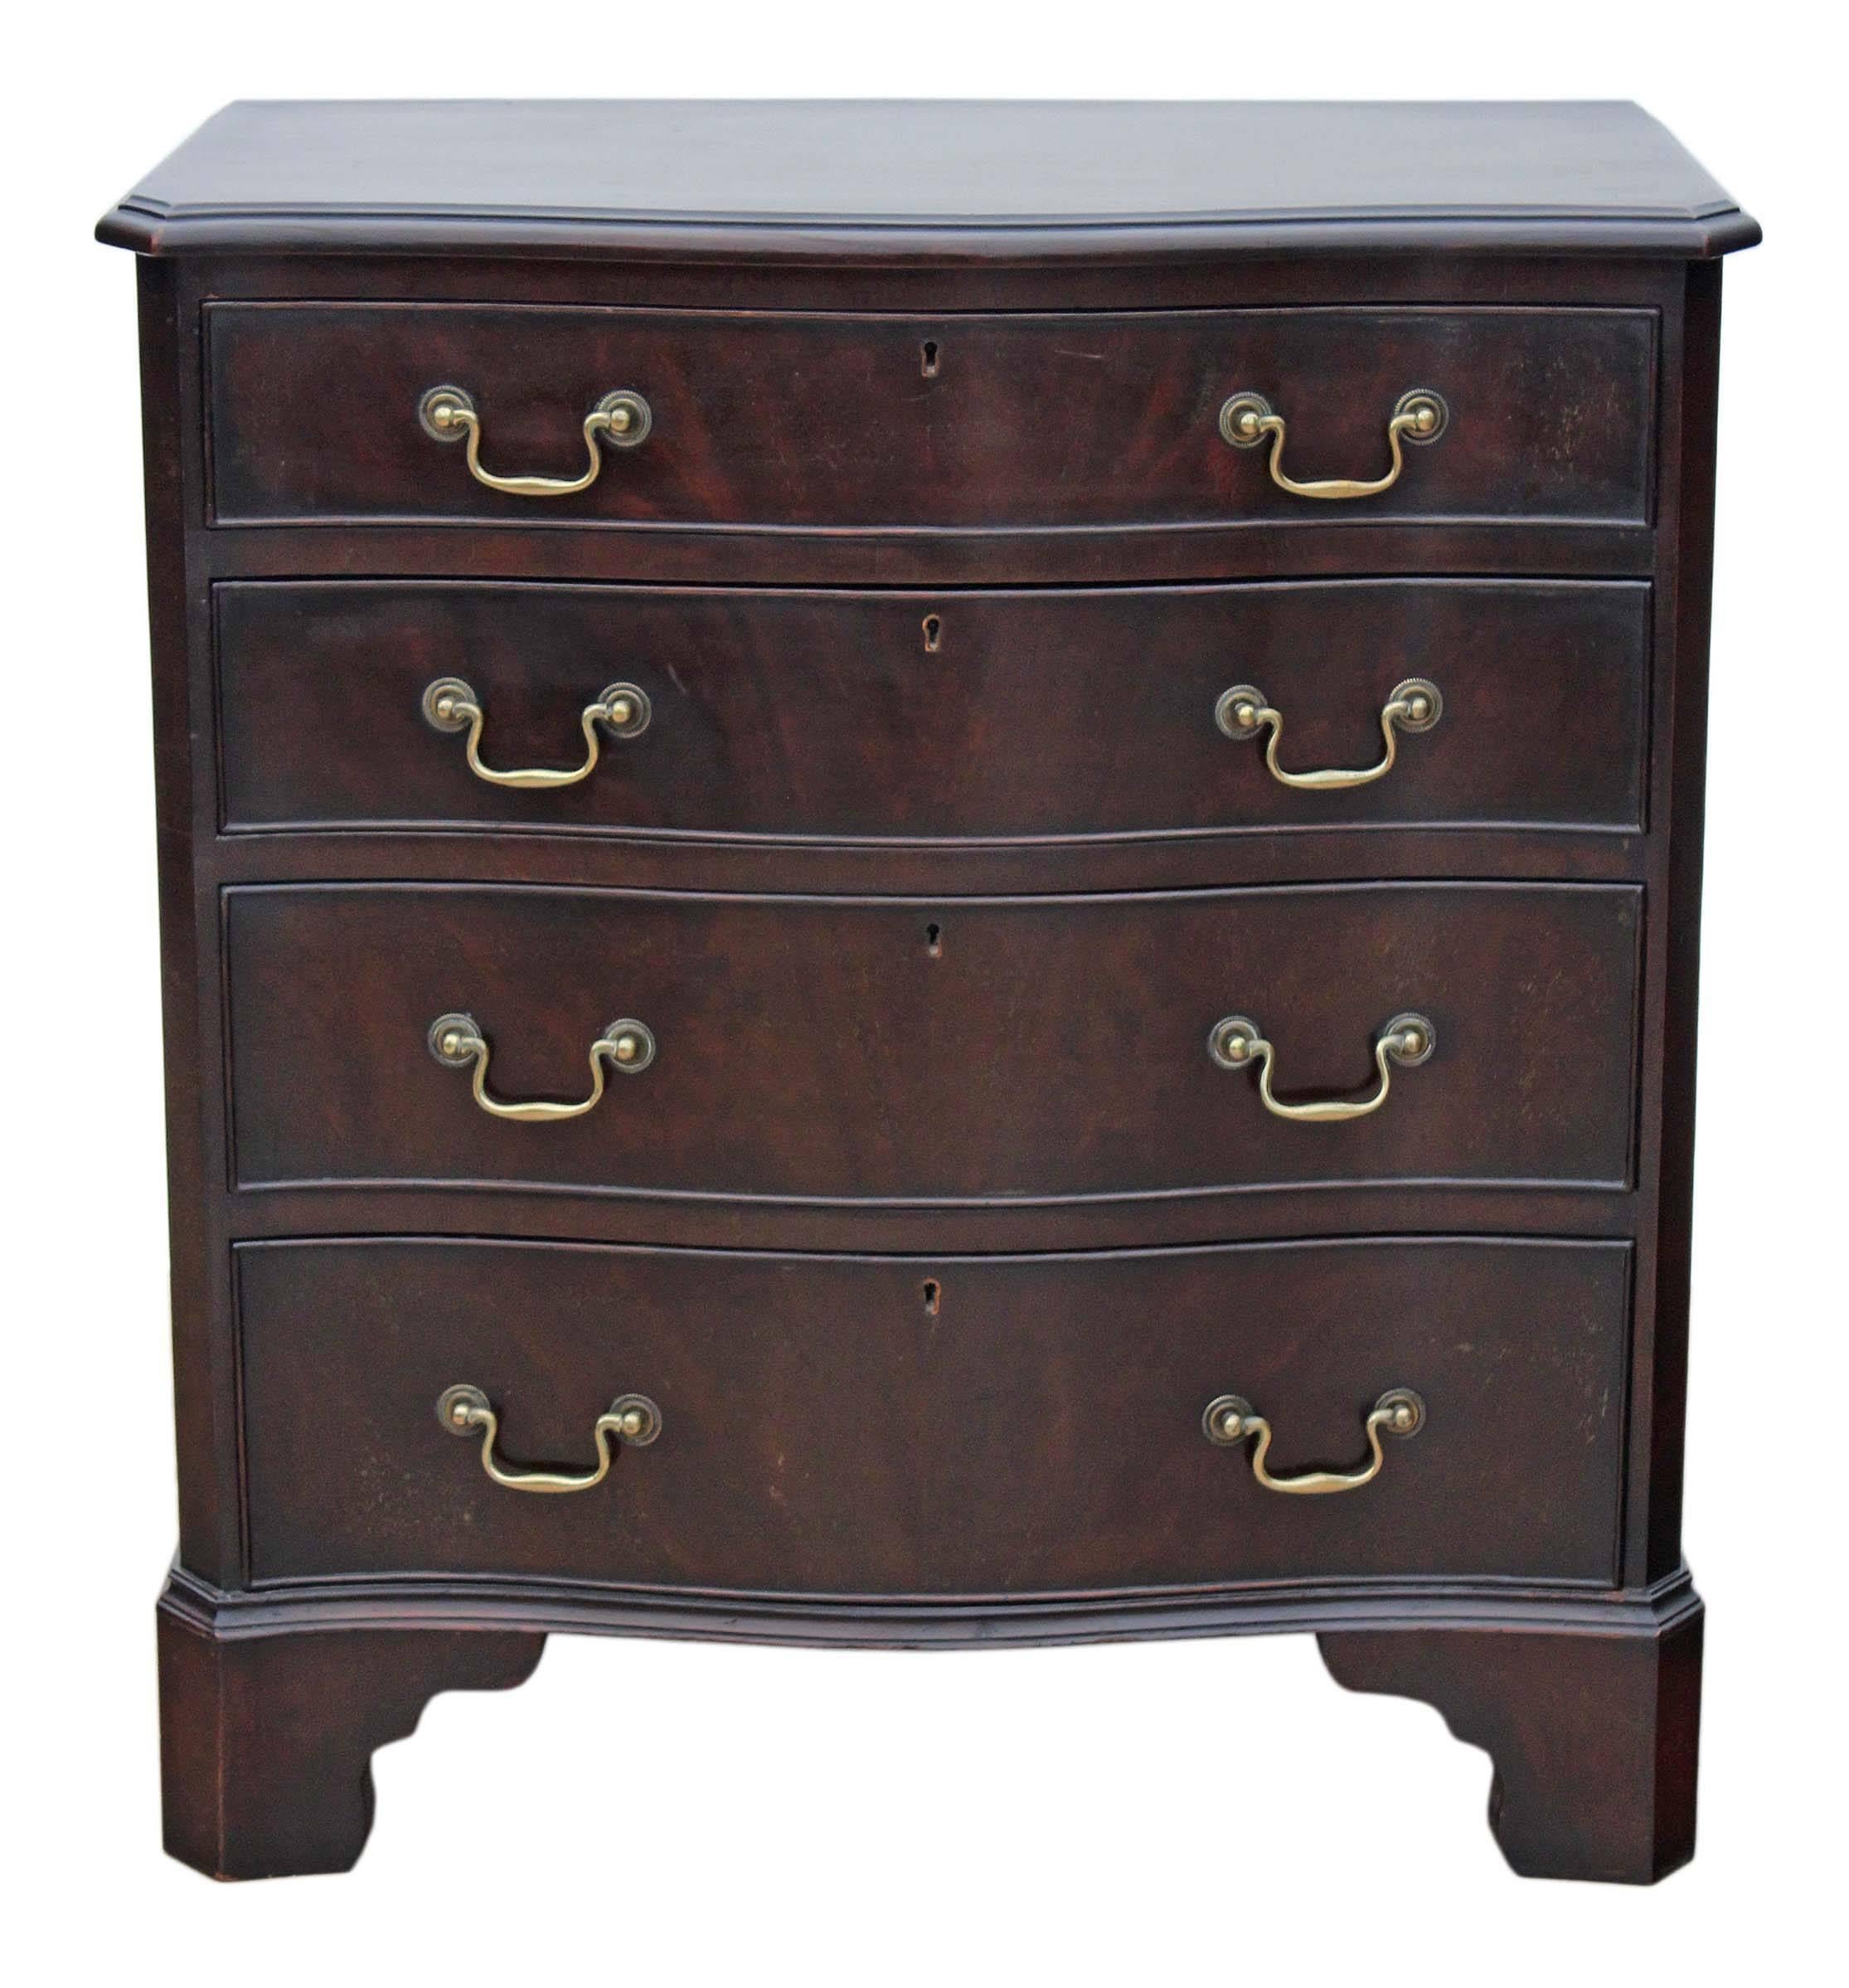 Antique quality Georgian revival small mahogany serpentine chest of drawers, circa 1925.
No loose joints and oak lined drawers slide freely.

Quality ormolu on brass handles and great small proportions.

Overall maximum dimensions: 77cm W x